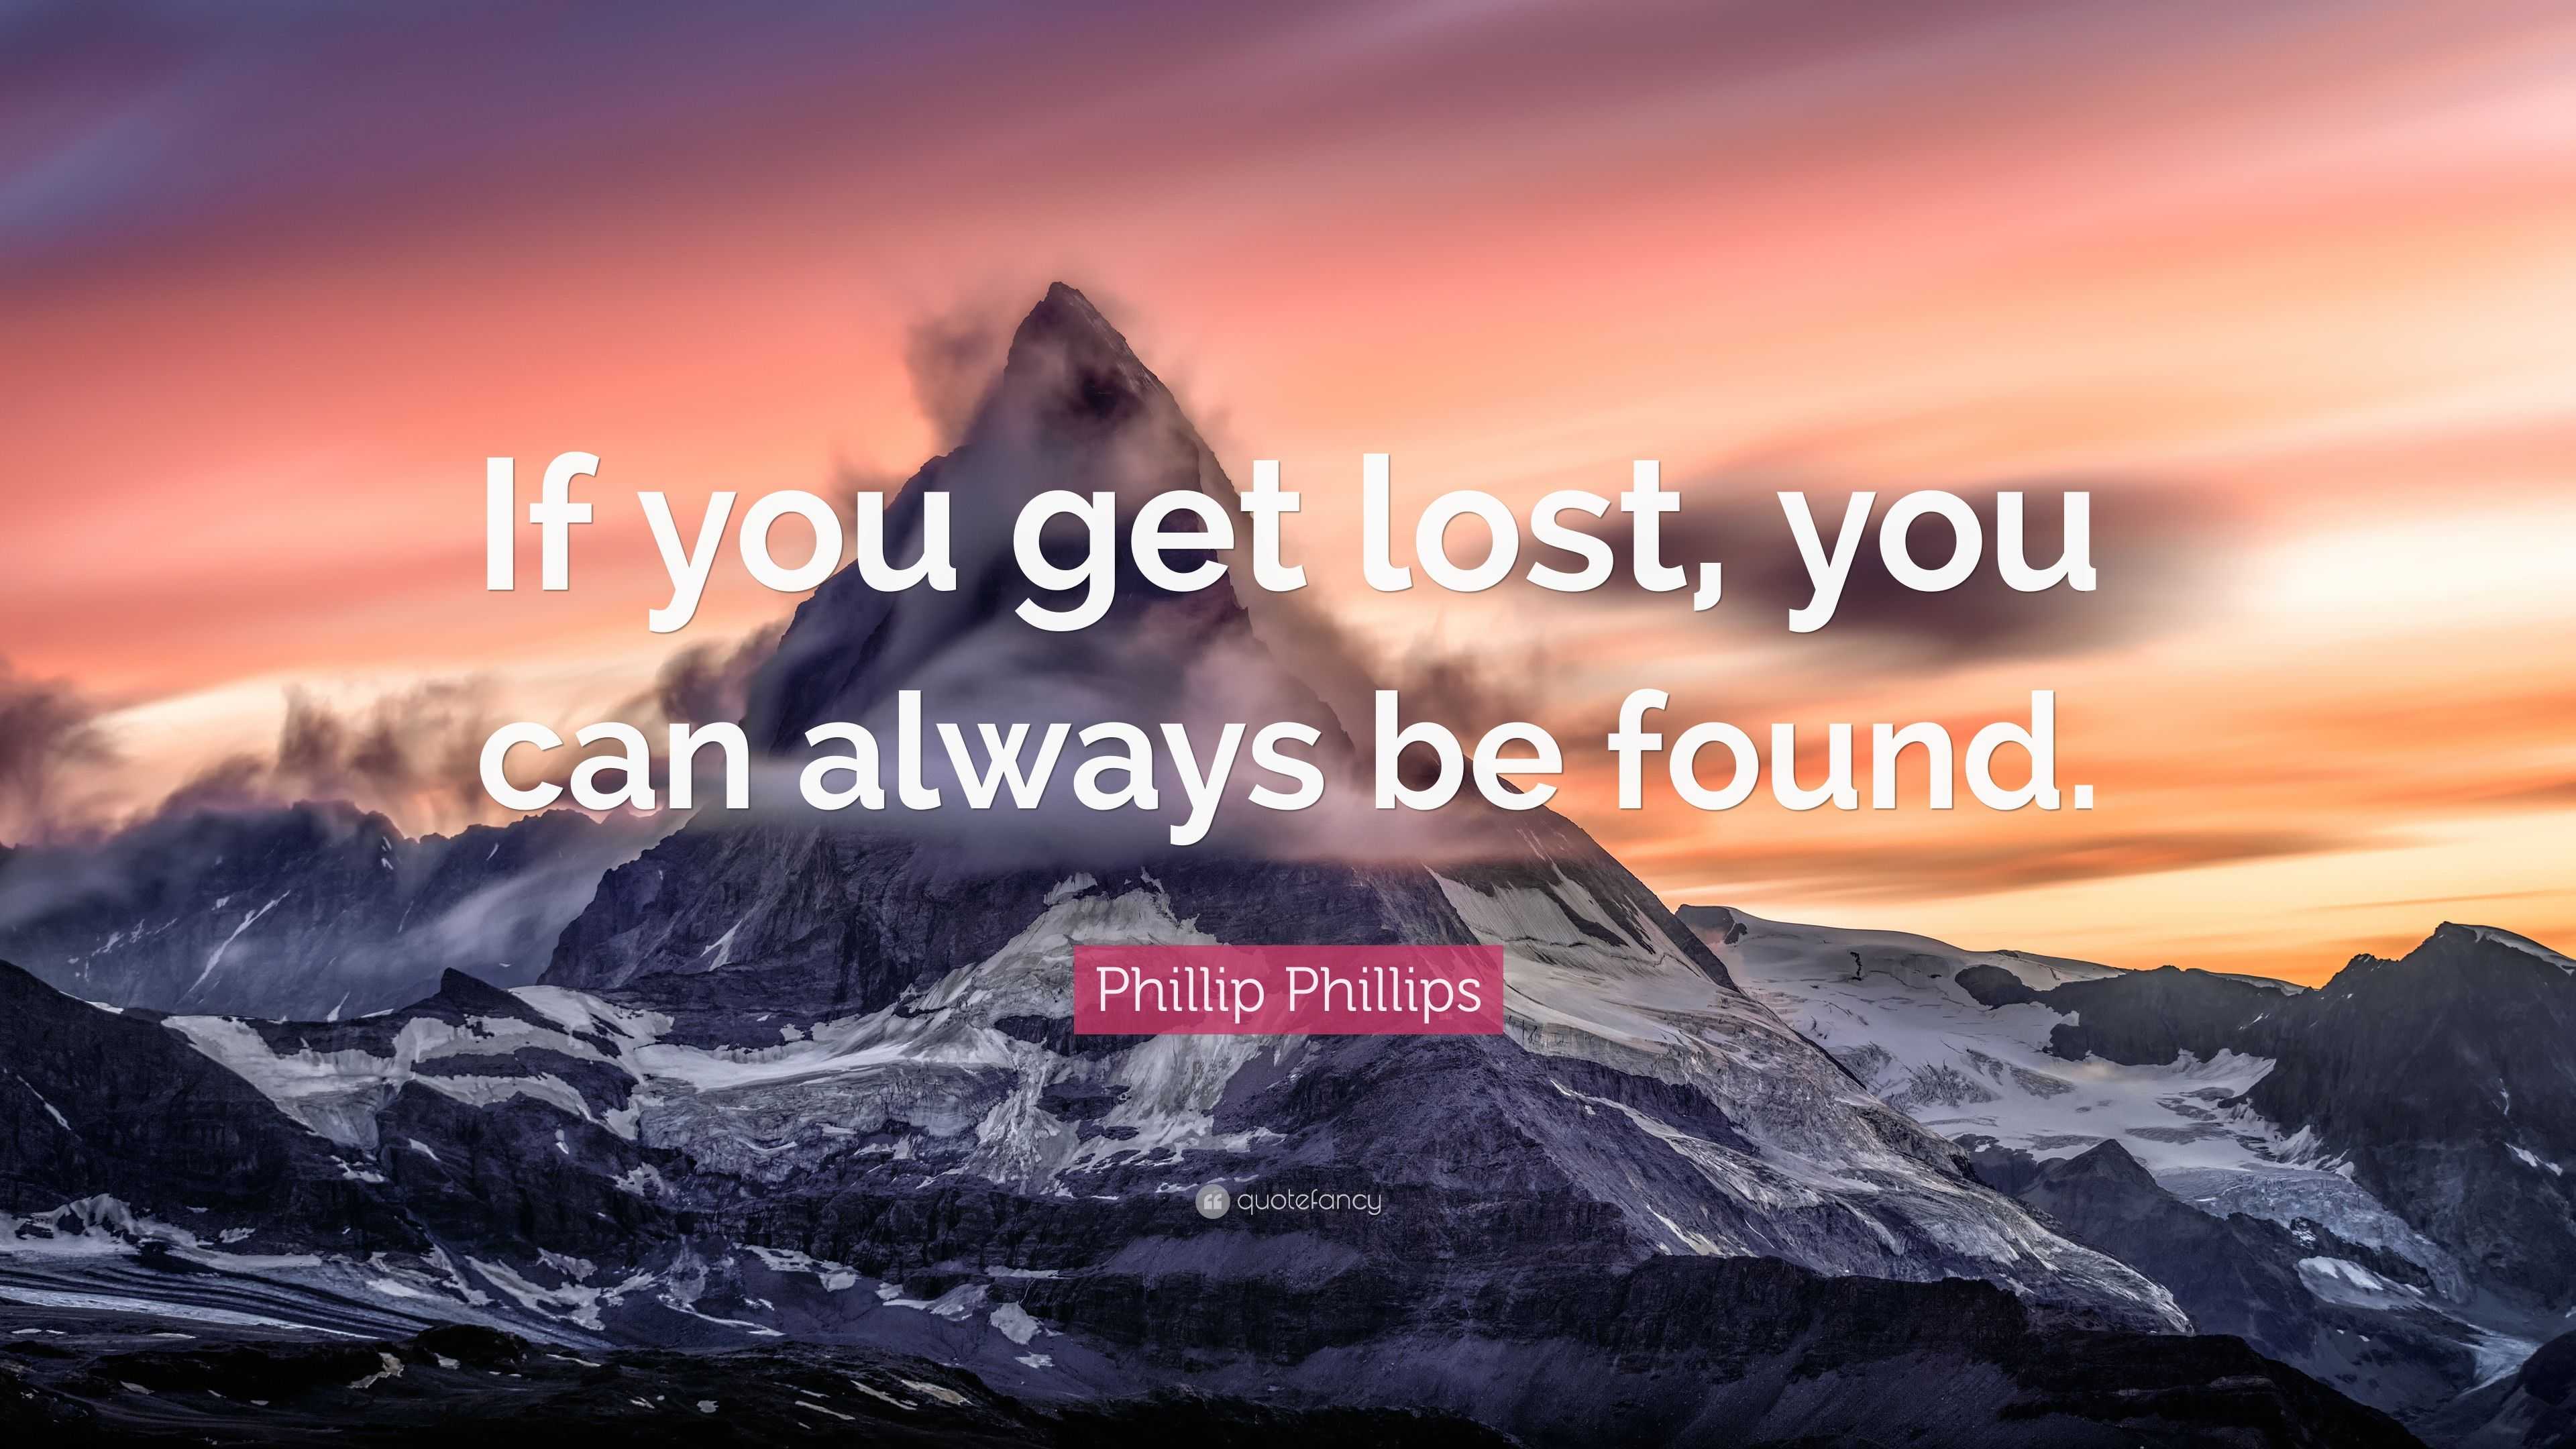 Phillip Phillips Quote: “If you get lost, you can always be found.”